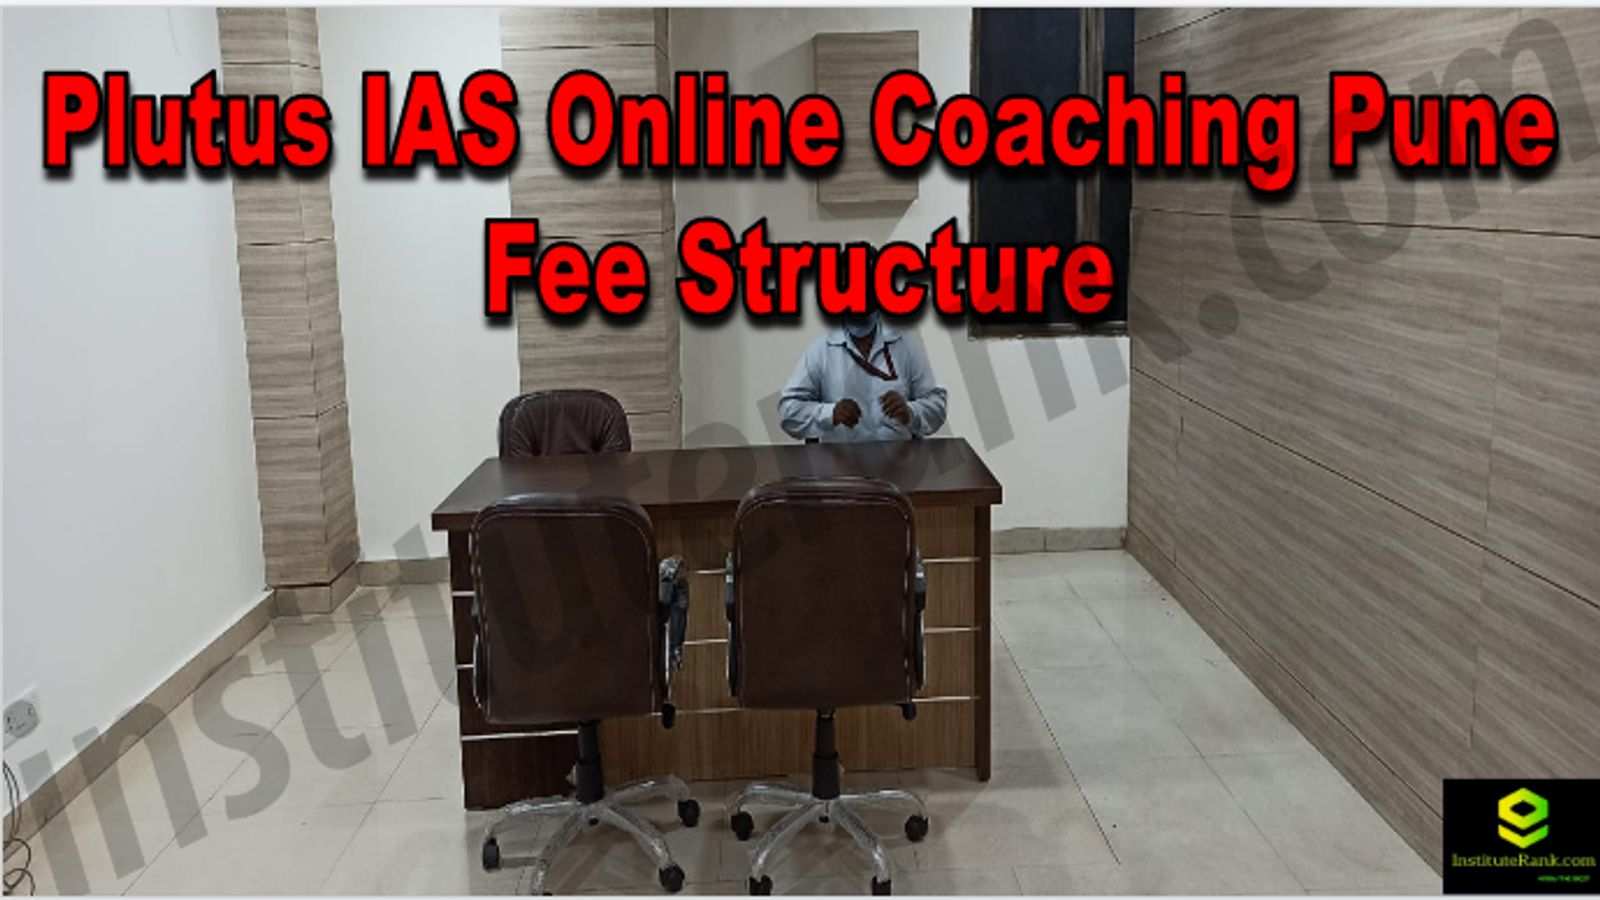 Plutus IAS Online Coaching Pune Reviews Fee Structure